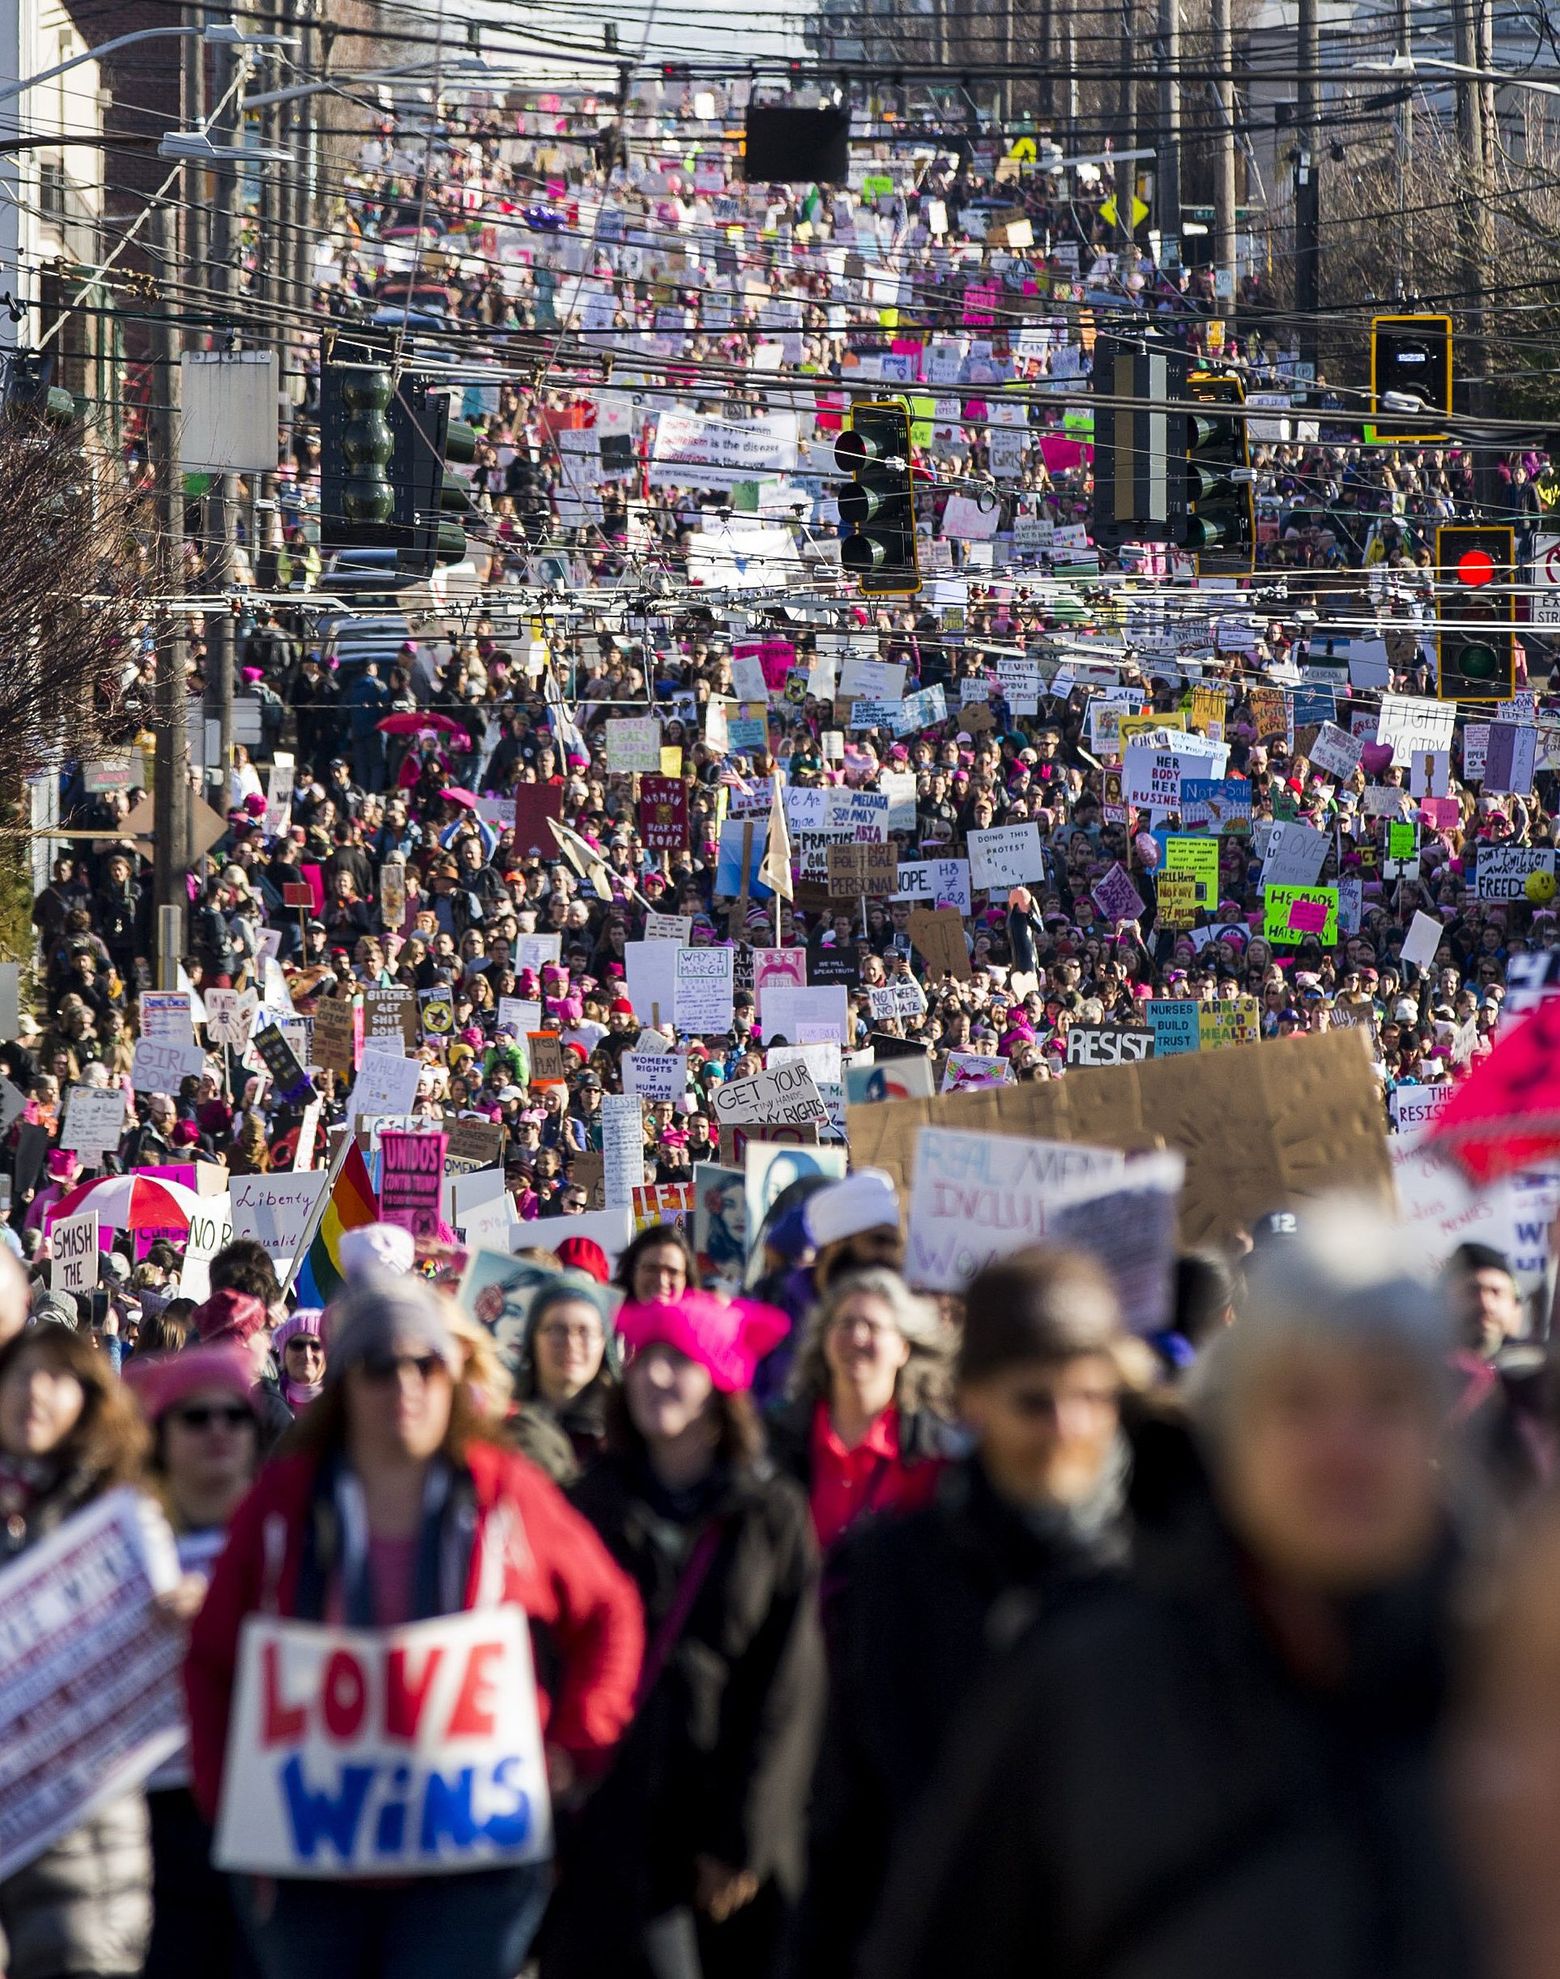 How many people really marched Saturday in Seattle? ‘Elementary-school math’ says 100K-120K